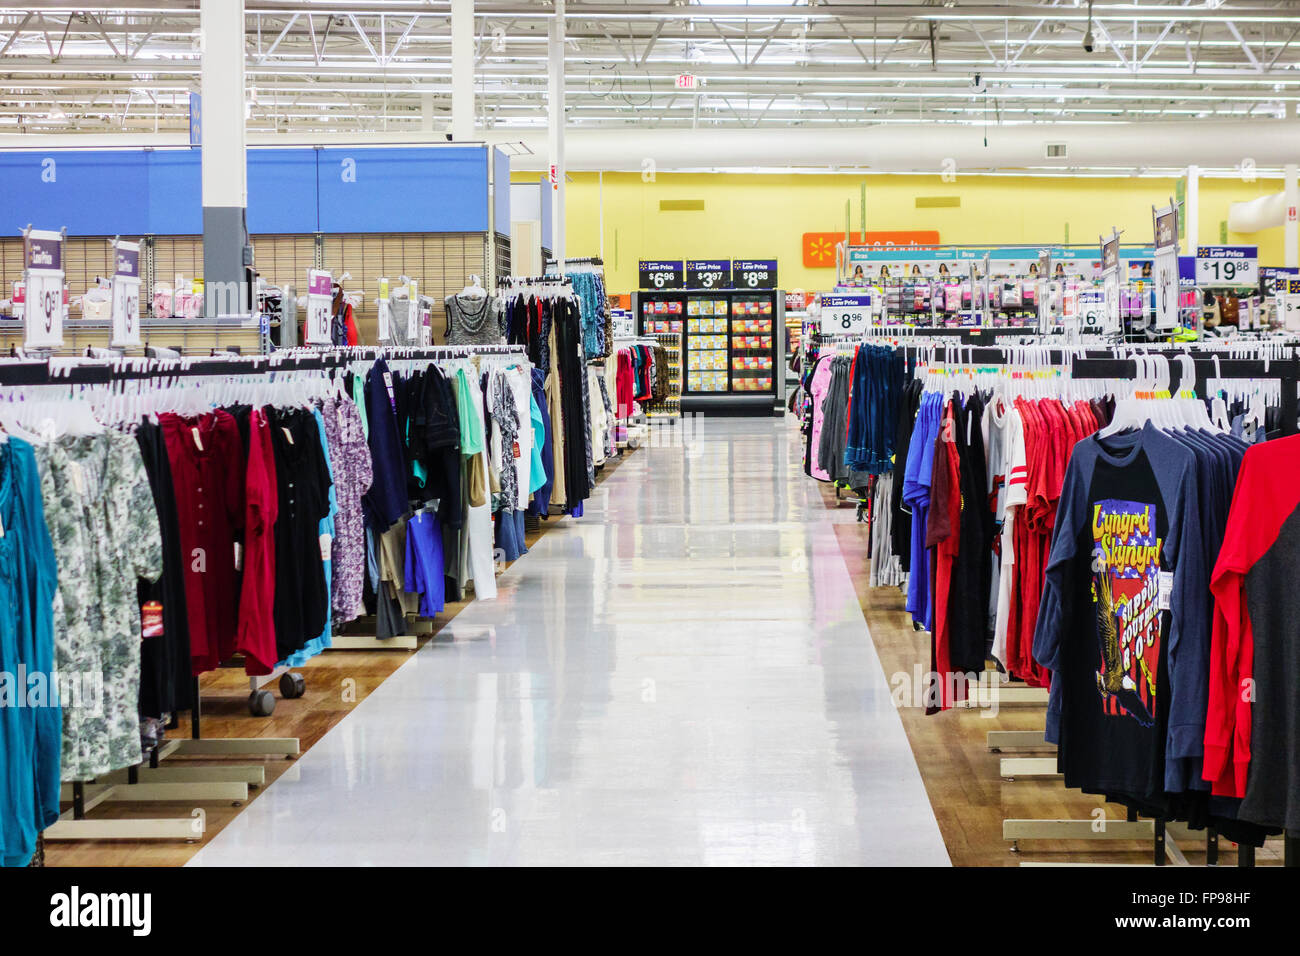 WalMart interior showing a clothing-lined aisle Stock Photo - Alamy